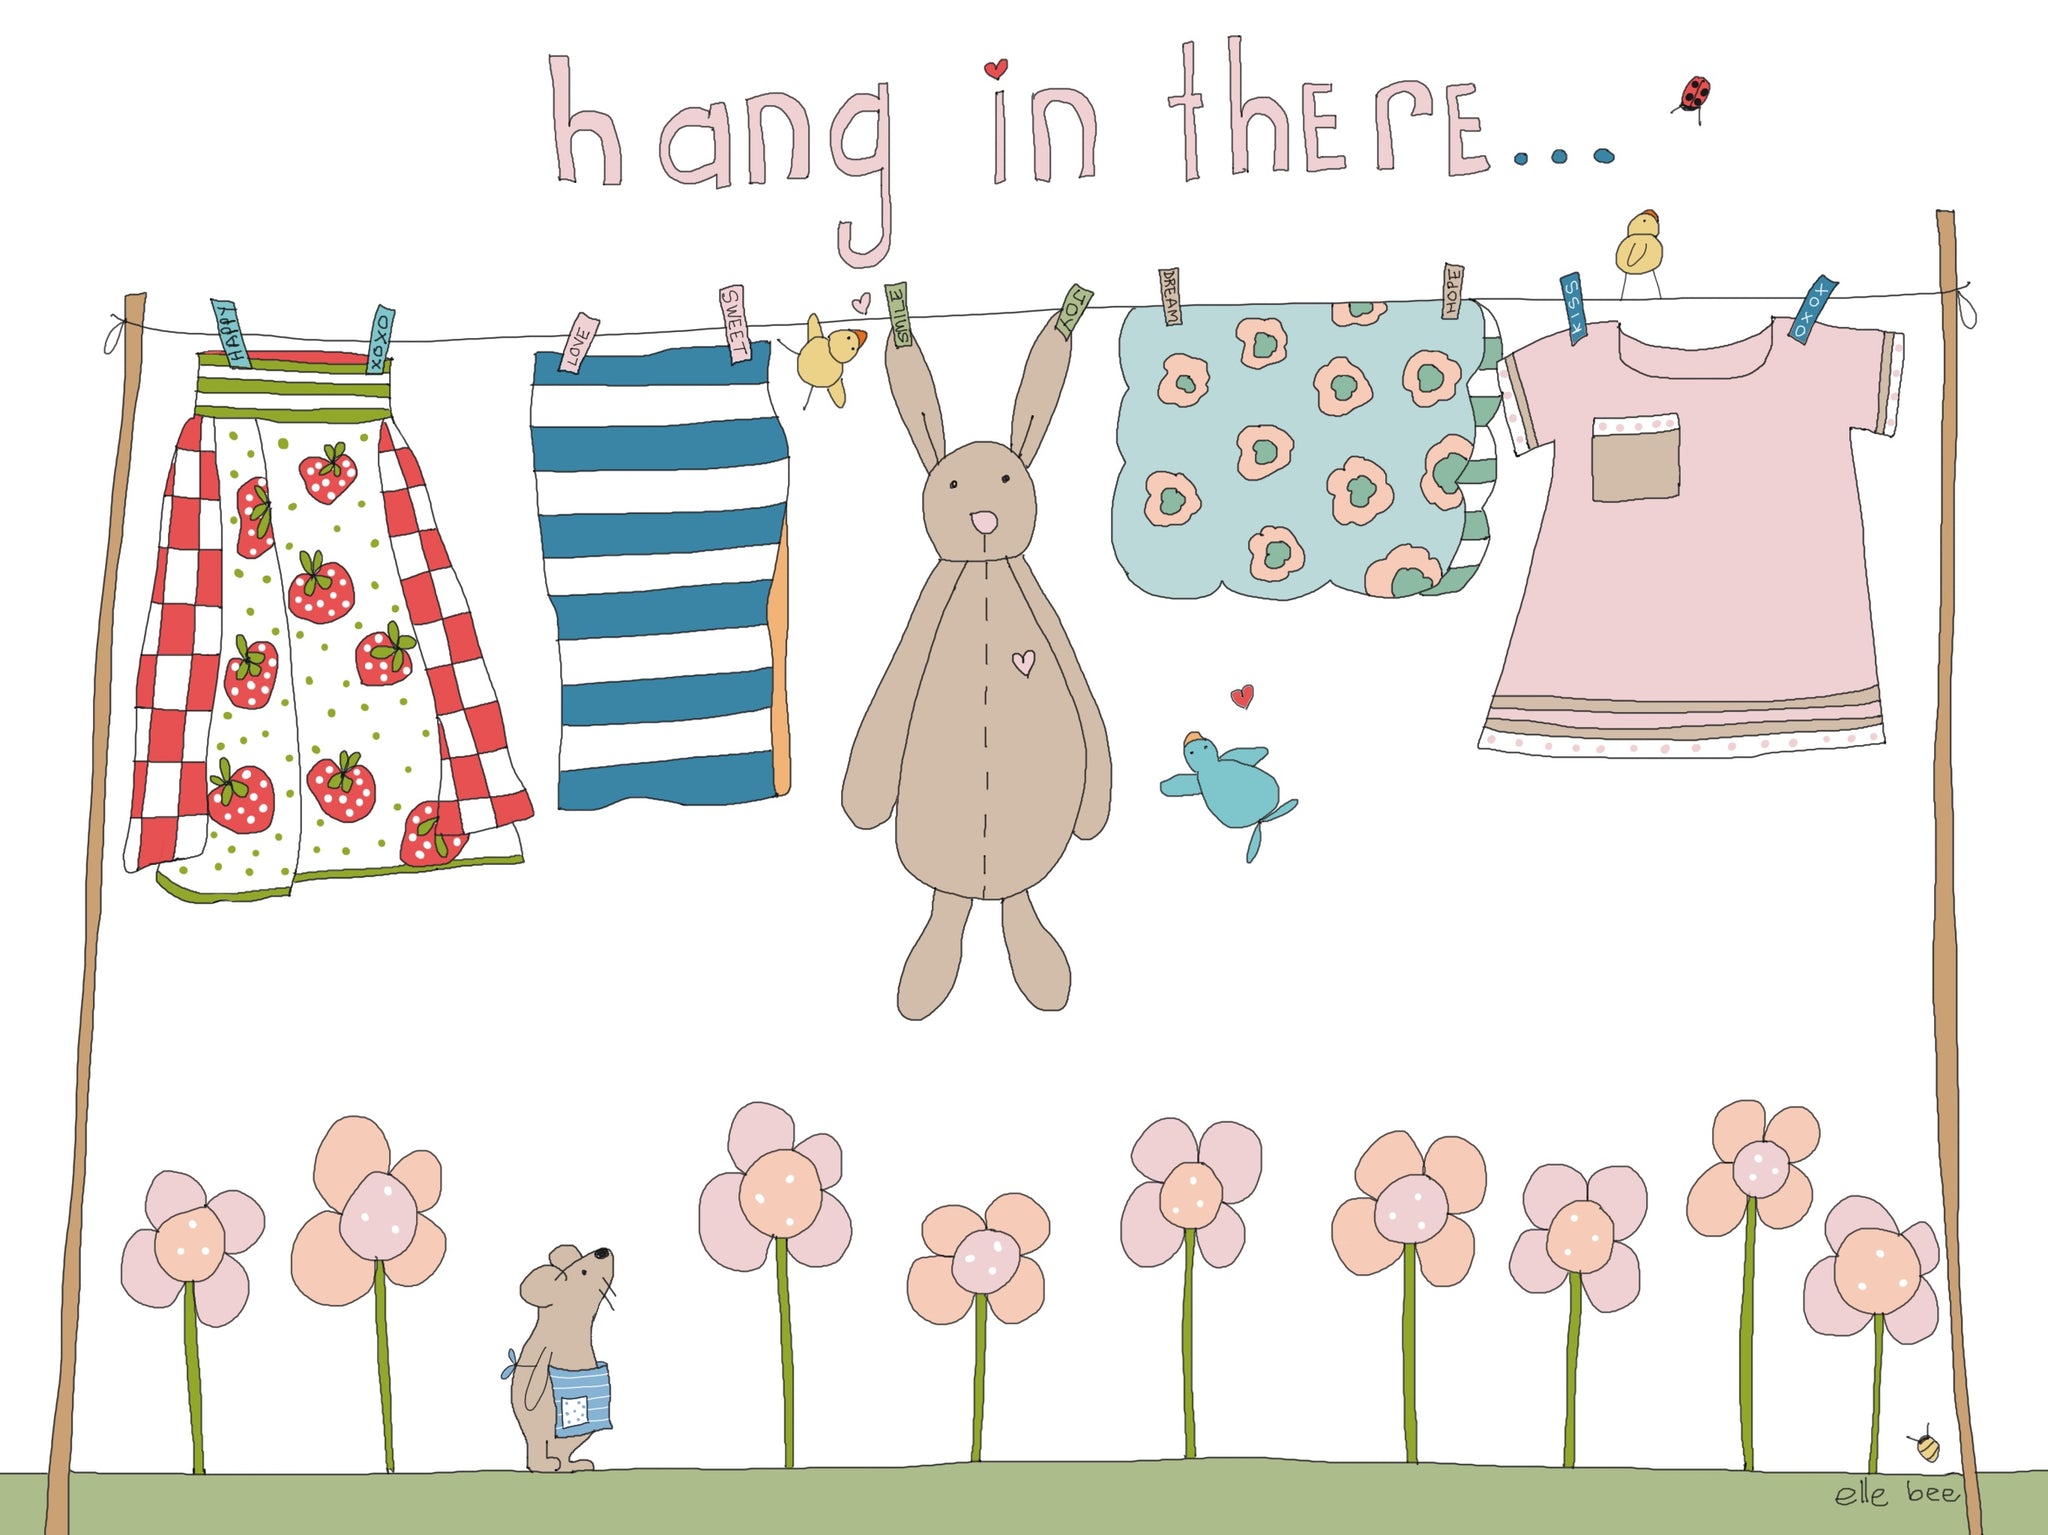 Greeting card "Hang in there"